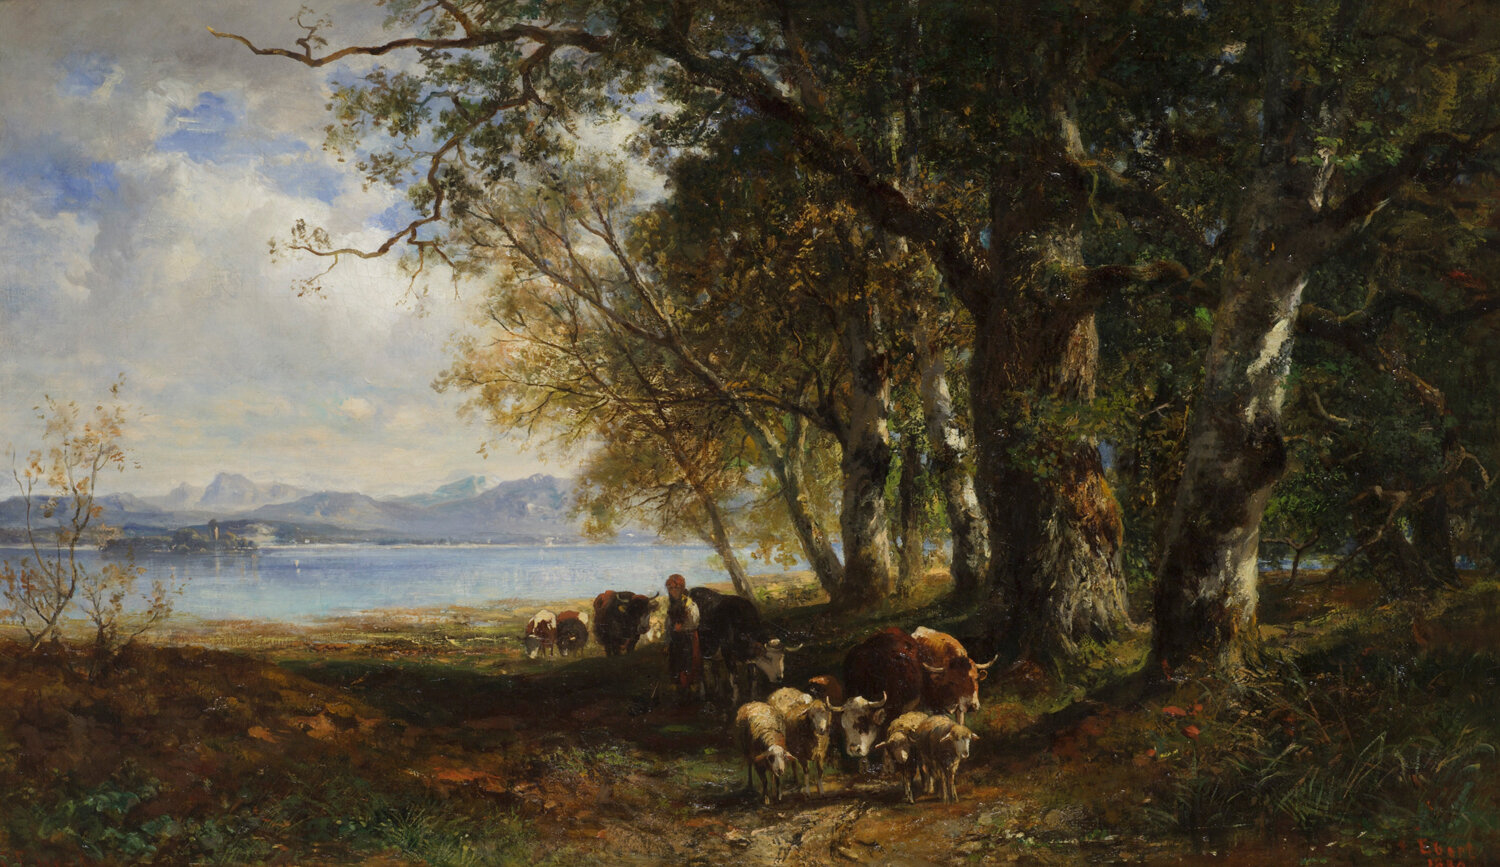 Carl Ebert. By the Shores of Chiemsee, 1880. Oil on canvas. 24 3/8 x 40 1/2 in. Founding Collection, Gift of Charles and Emma Frye, 1952.041. Photo: Spike Mafford